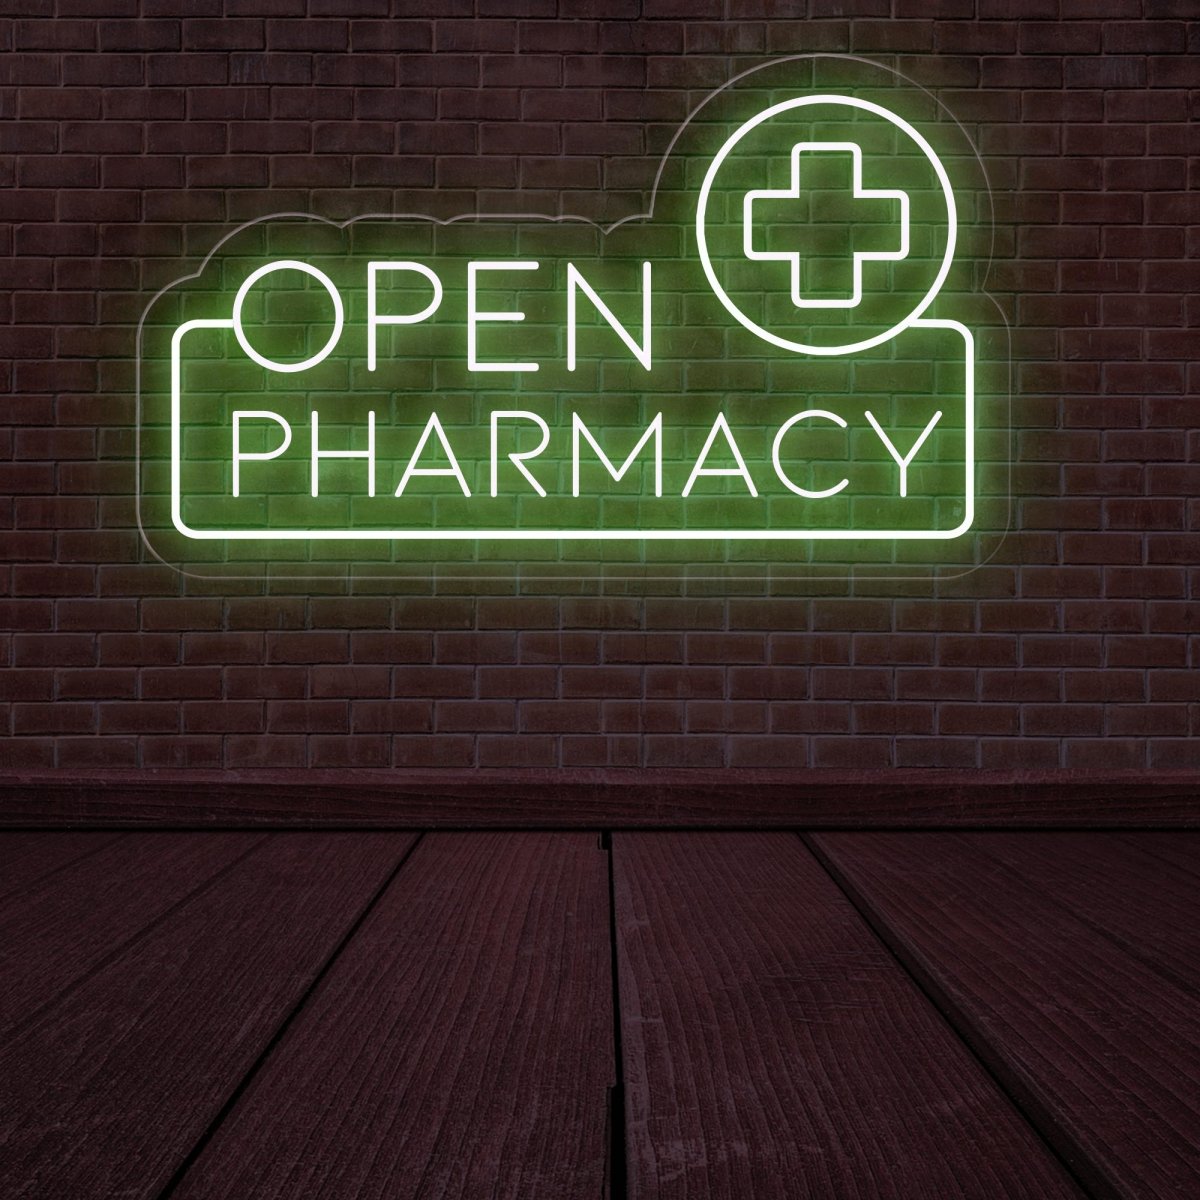 Pharmacy Open LED Neon Sign | Bright Window Business Signage - NEONXPERT